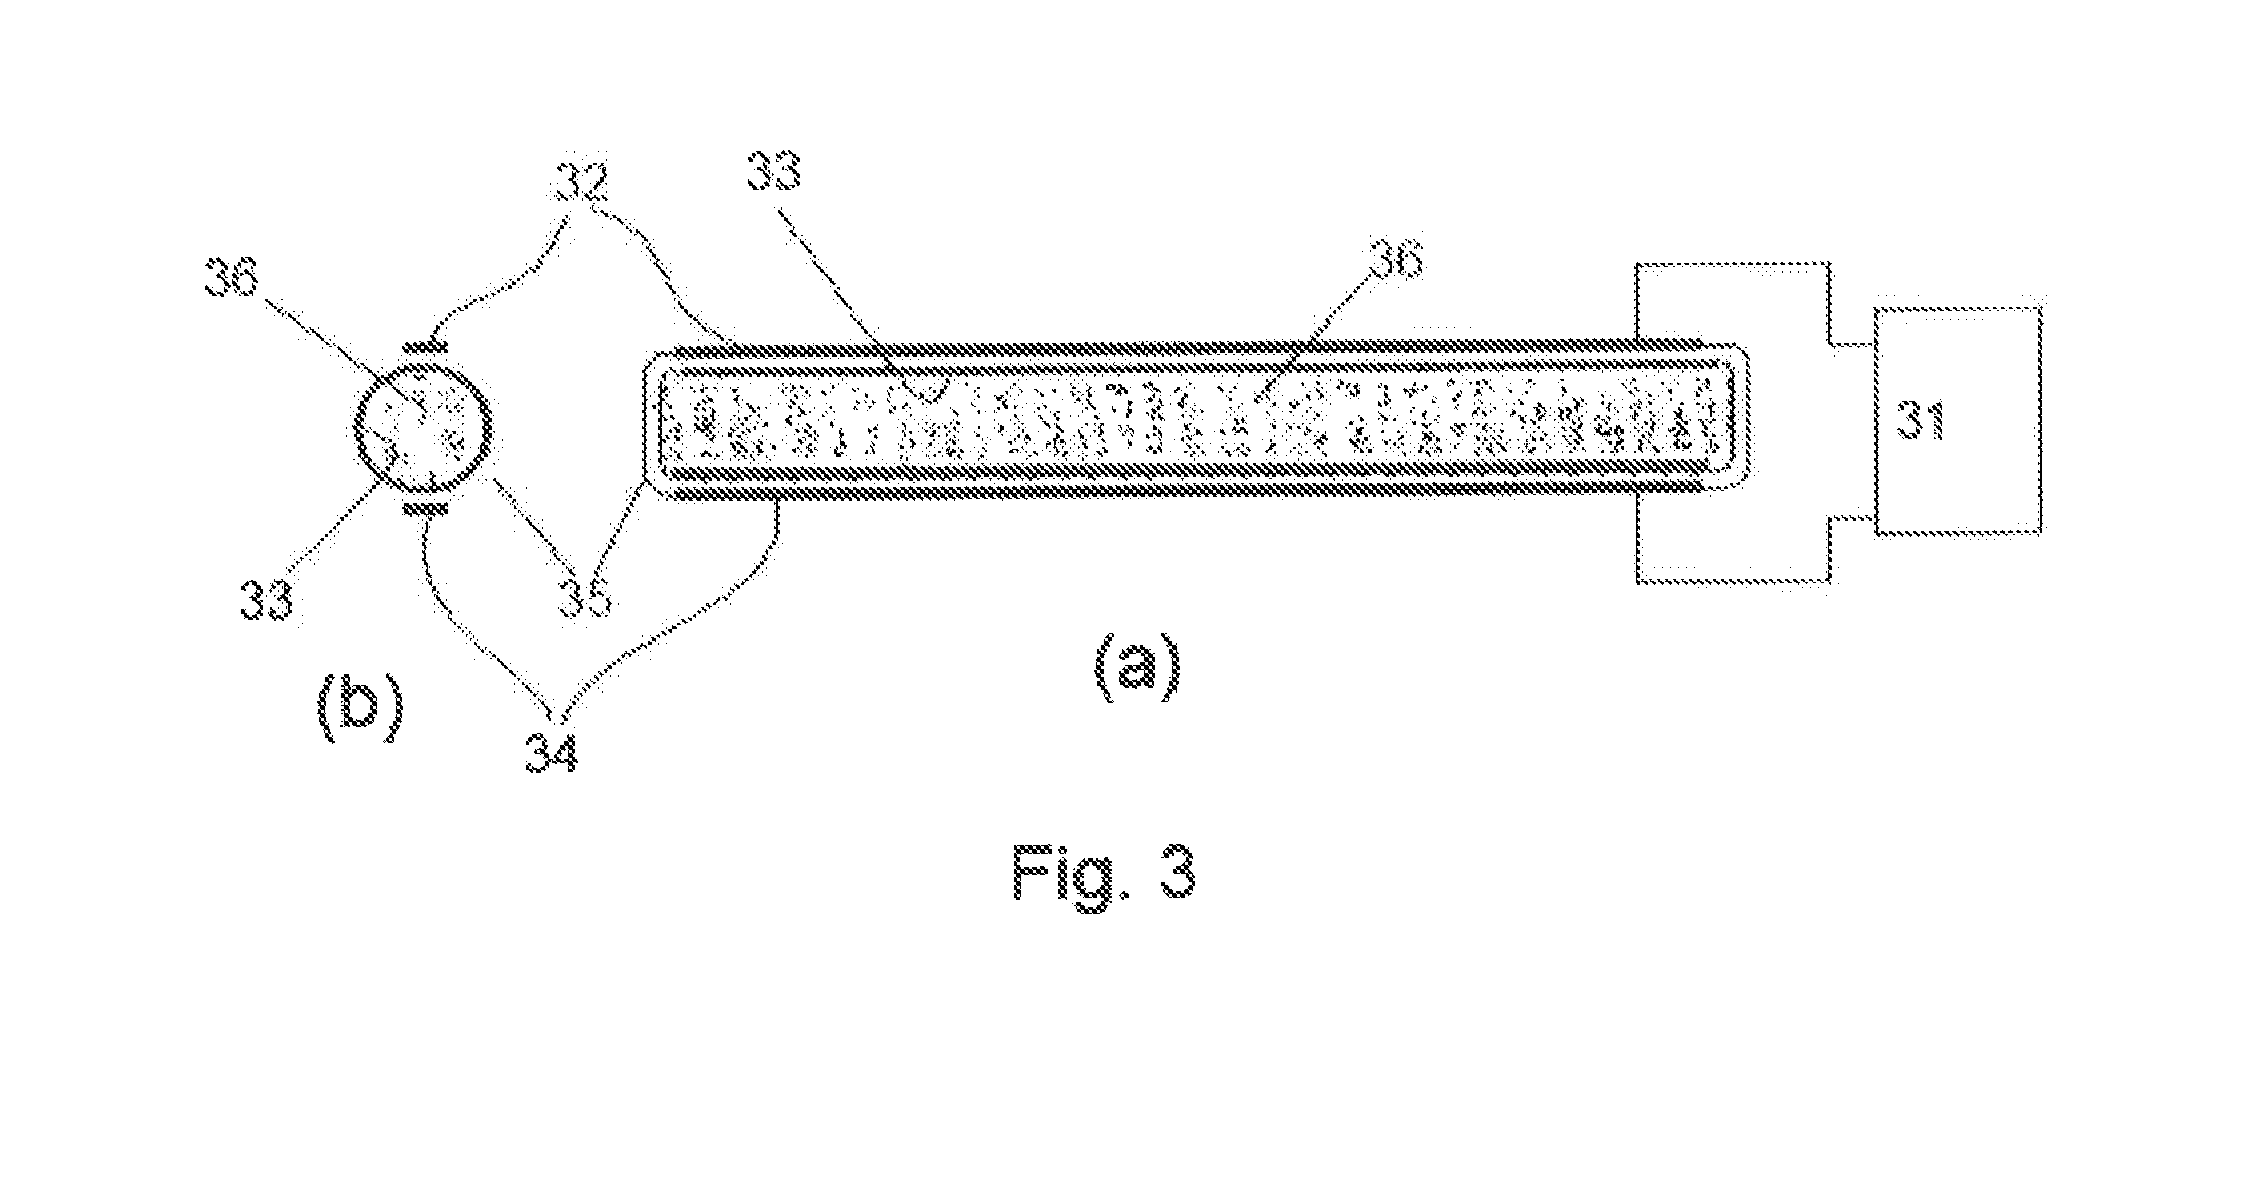 UV-Curing Apparatus Provided With Wavelength-Tuned Excimer Lamp and Method of Processing Semiconductor Substrate Using Same